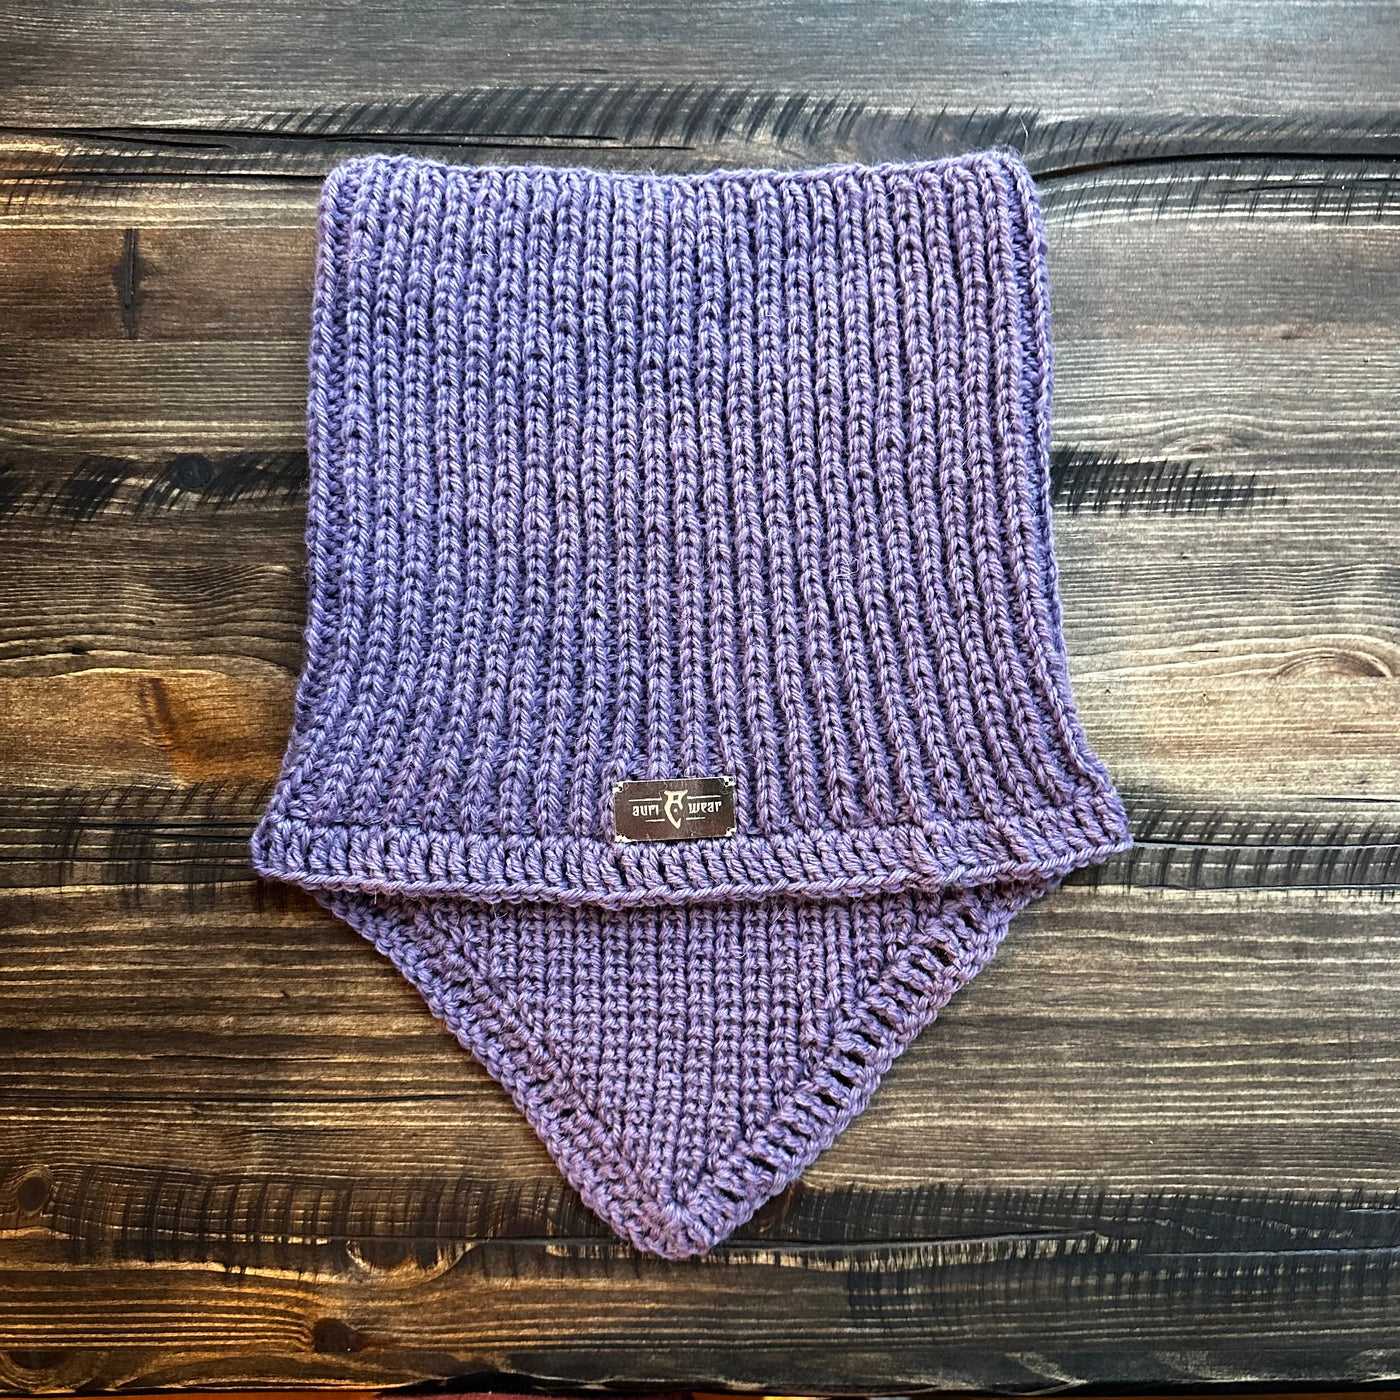 Handmade knitted dreamy lavender cowl